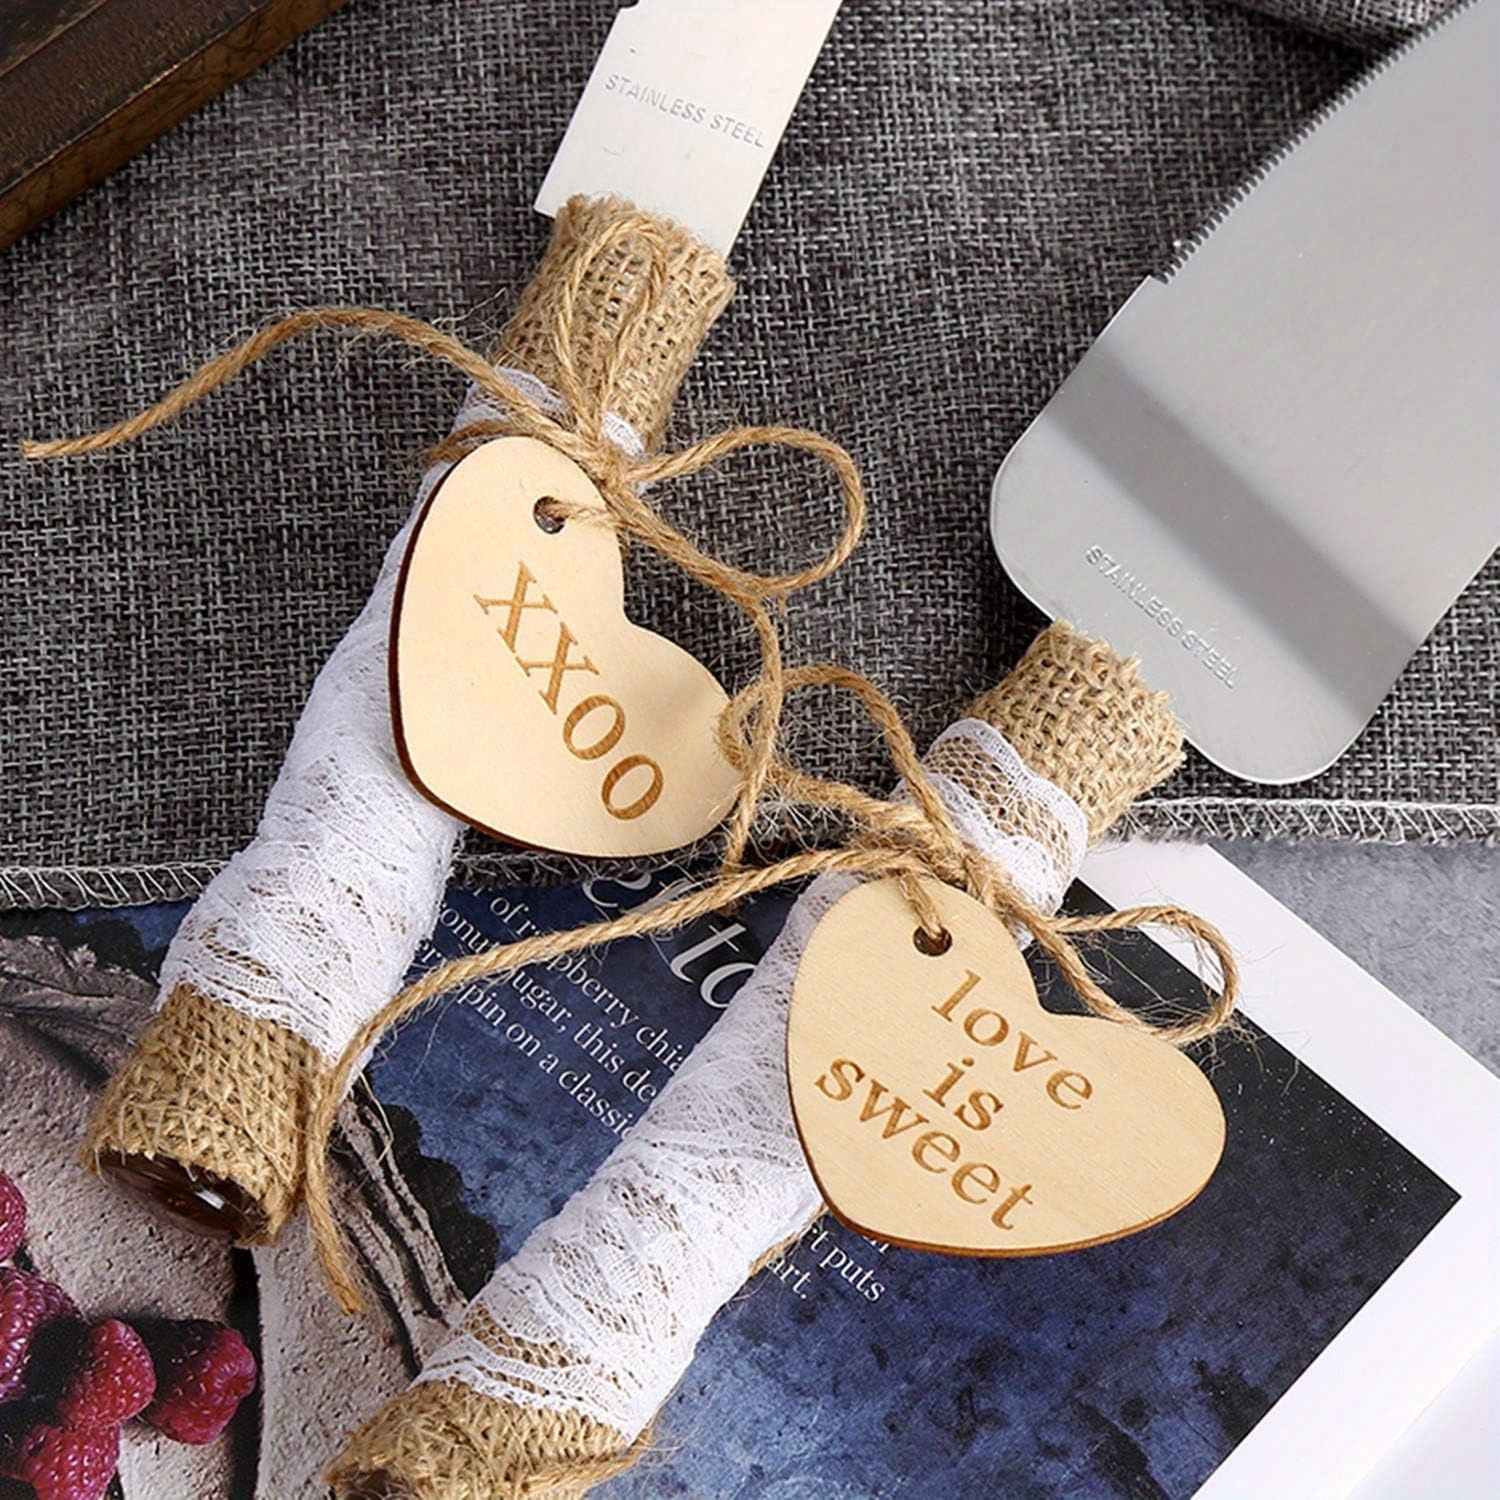 

Stainless Steel Cake Knife And Server Set With Burlap Lace, Twine-wrapped Heart Tag – Elegant Wedding Cake Cutting And Serving Tools